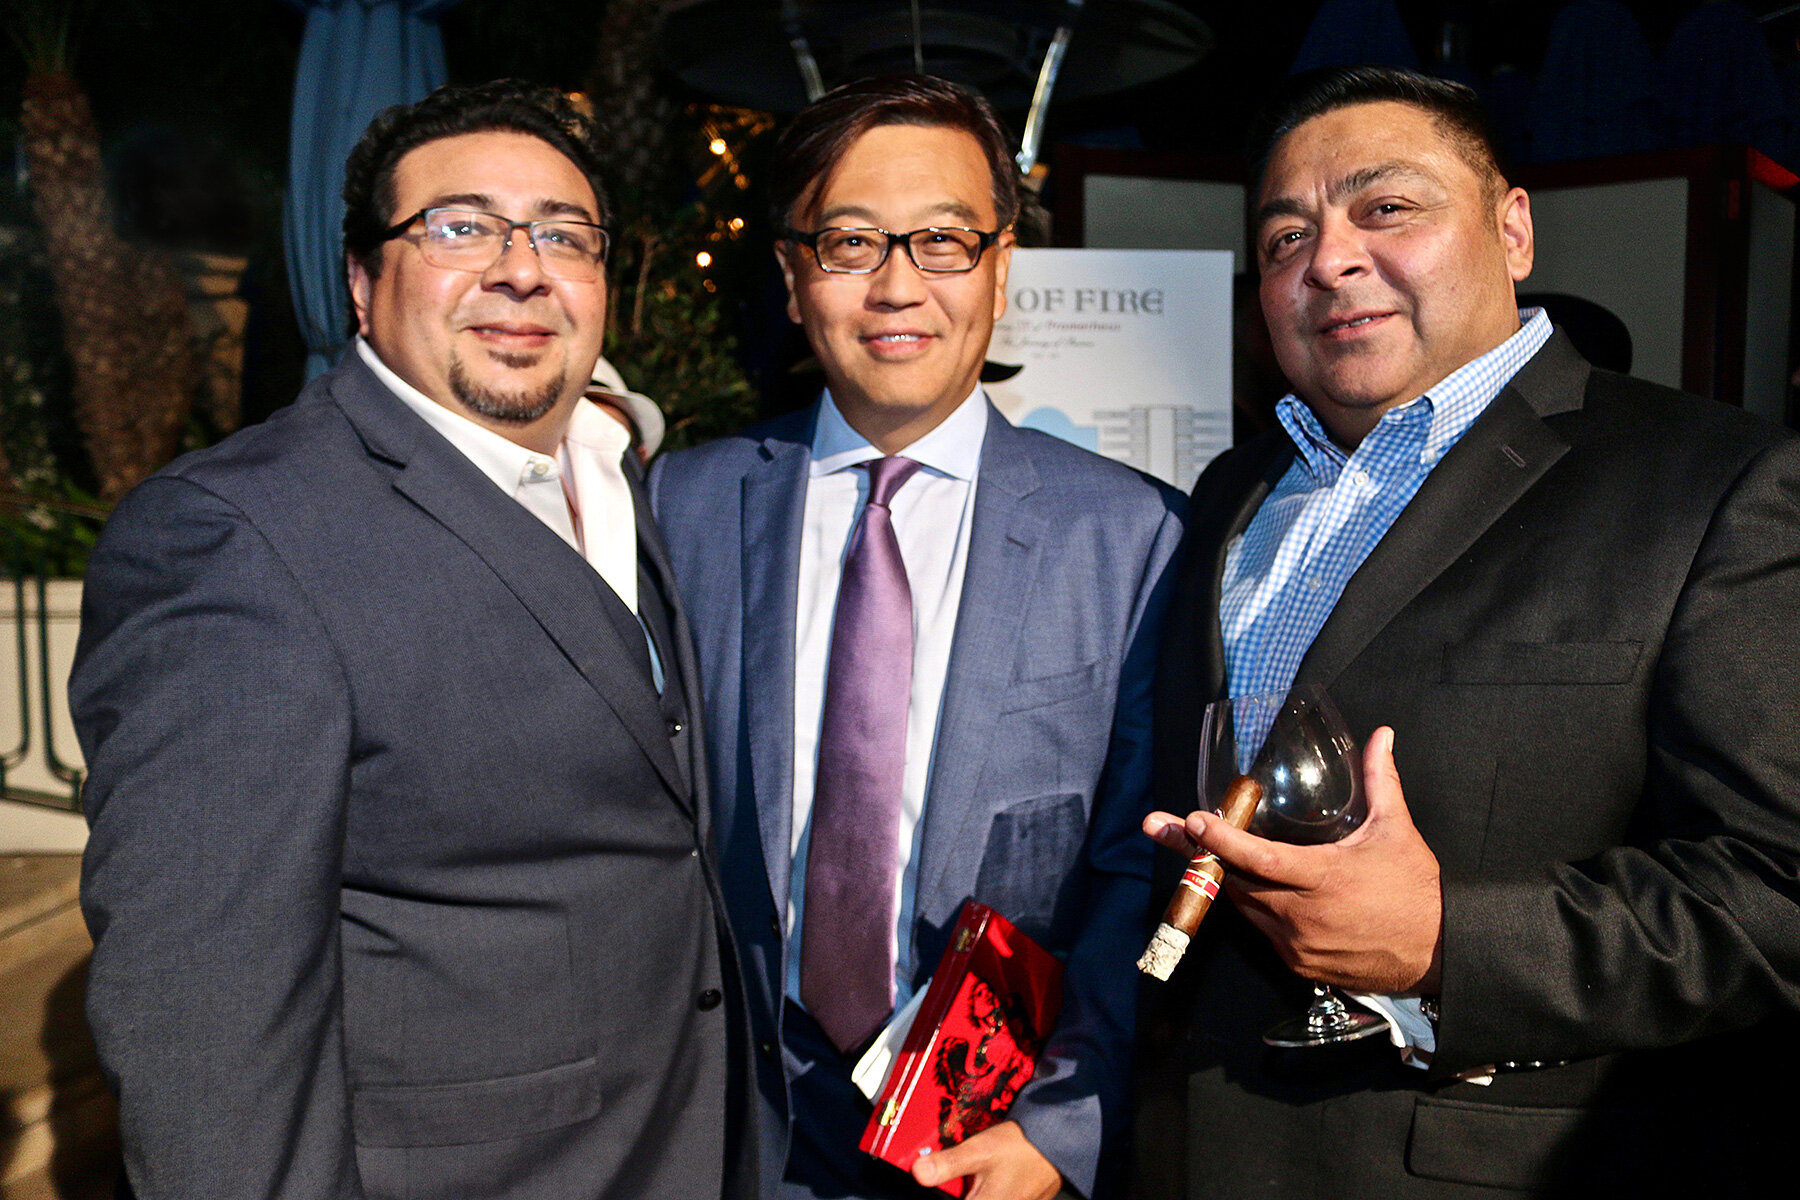 Enrique (left) and Pedro (right) Carvajal with Keith K. Park